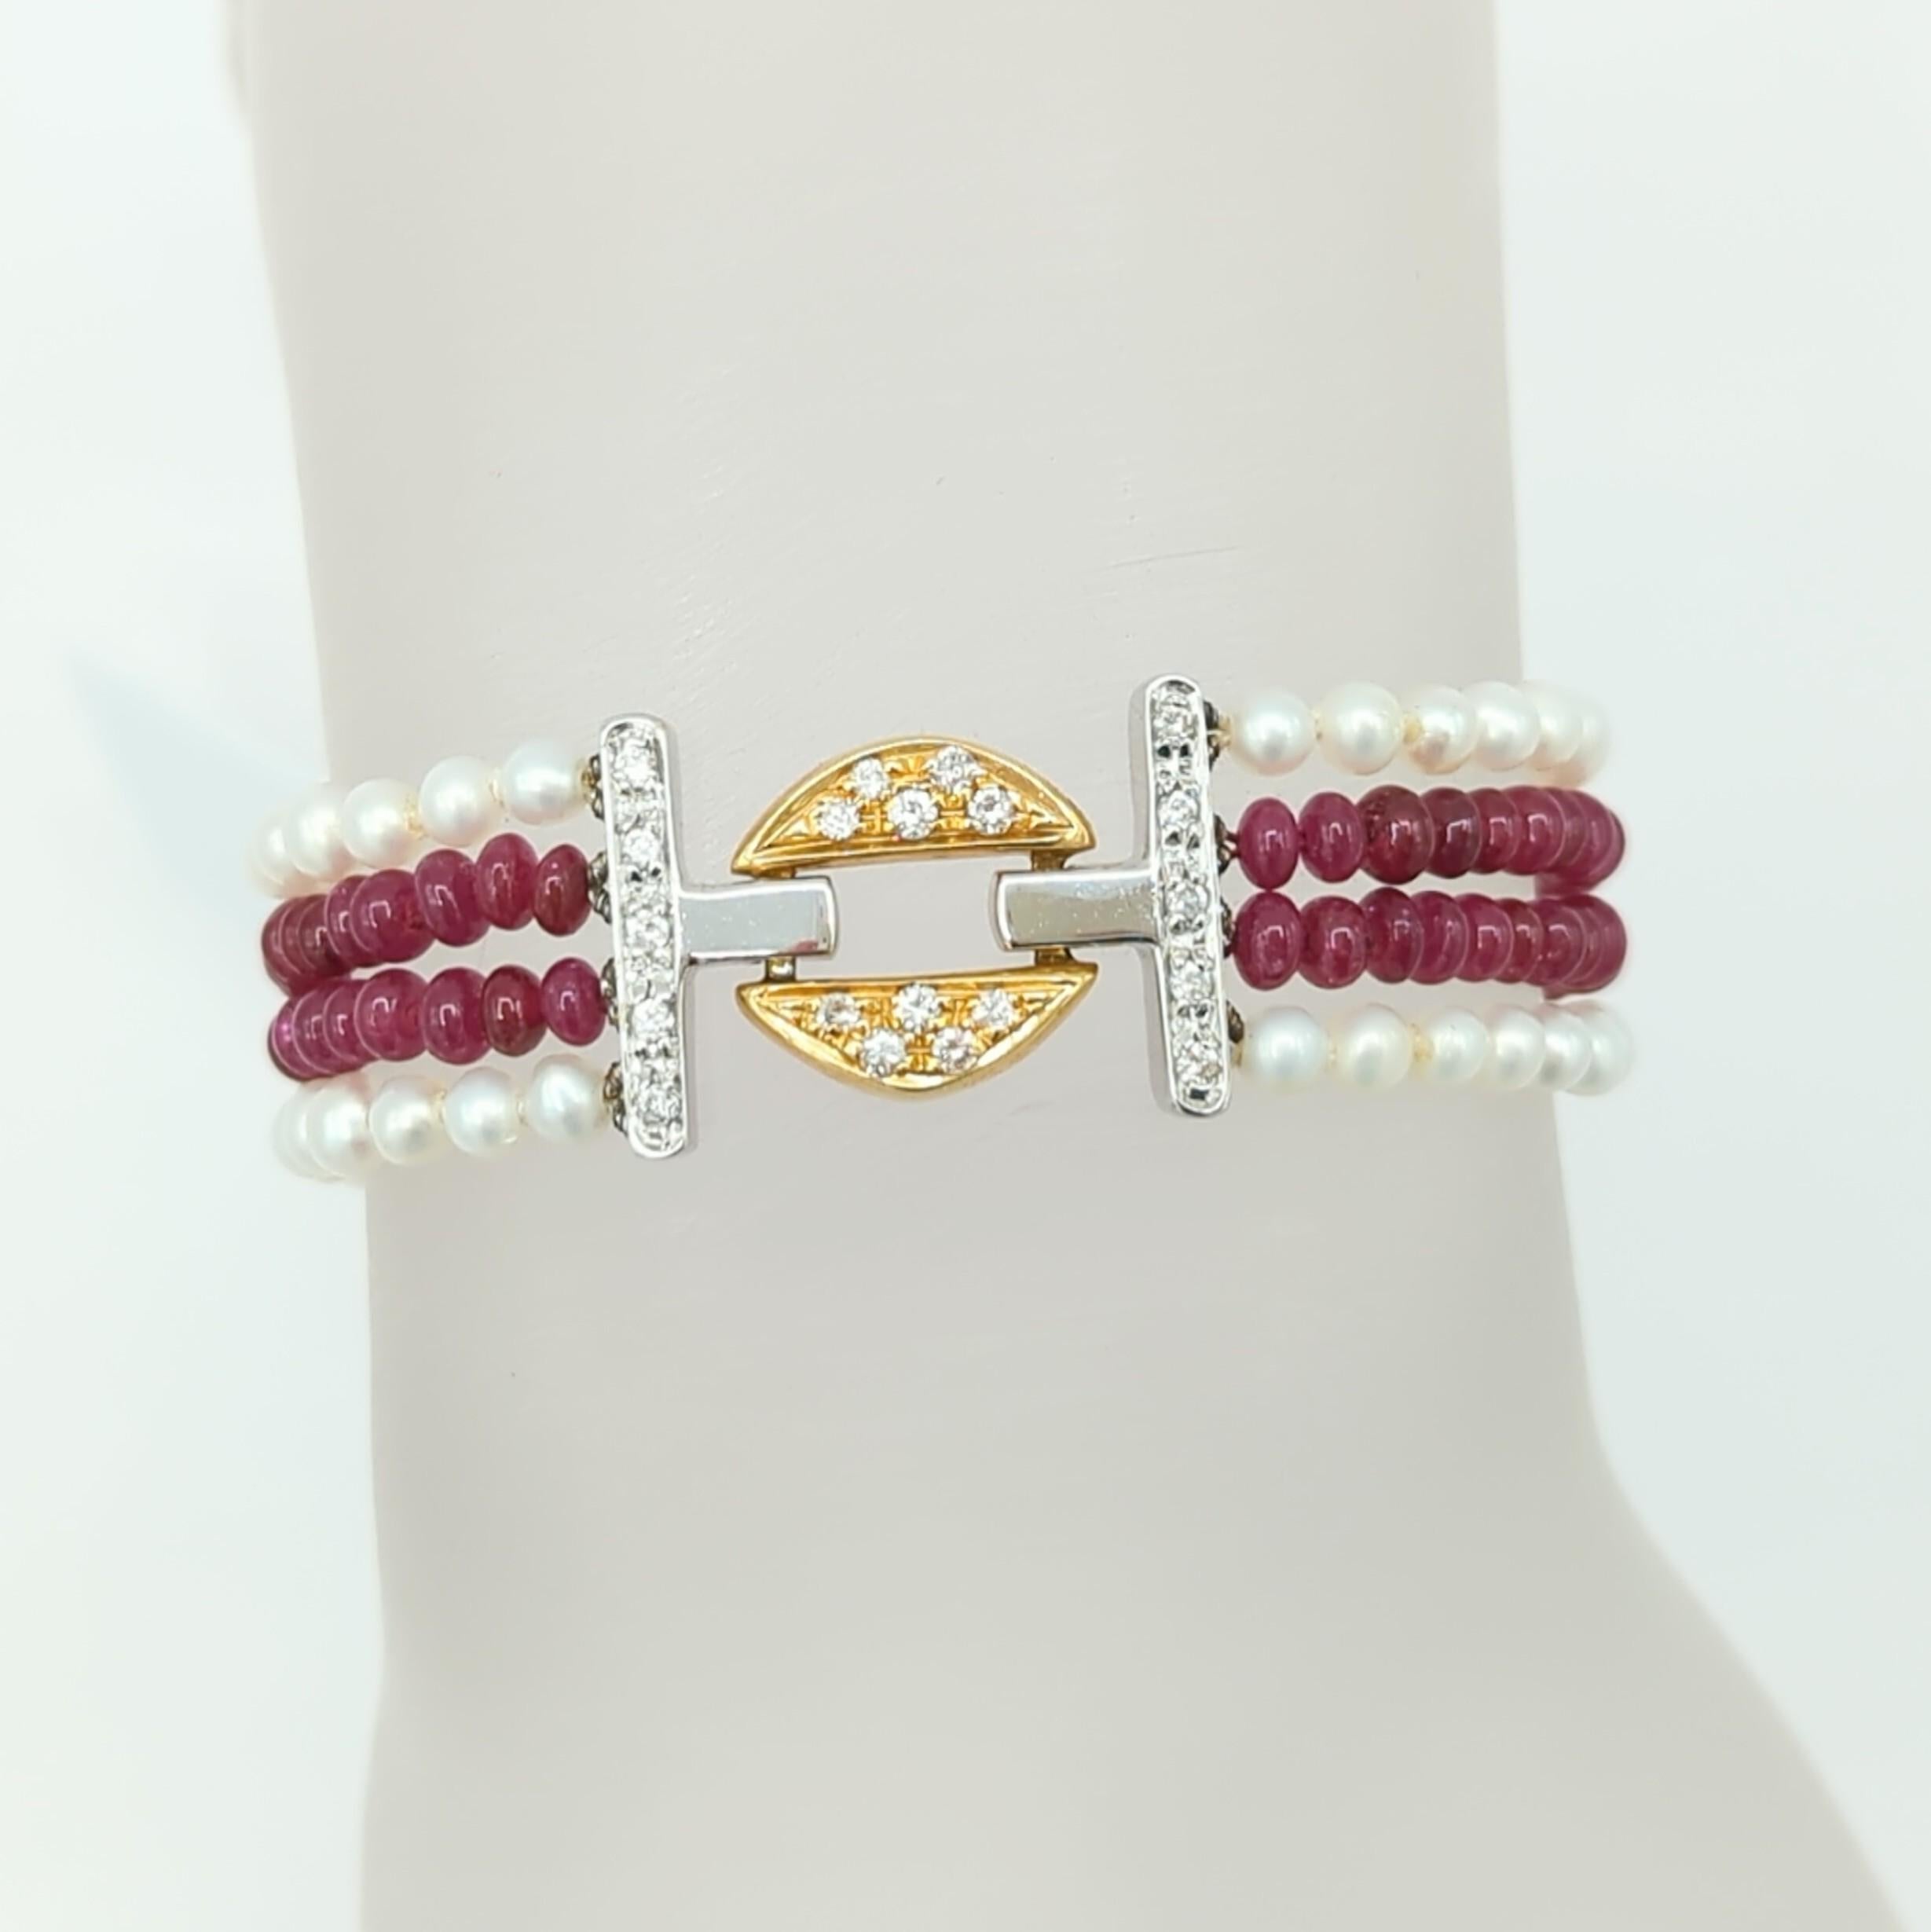 Ruby Bead, White Pearl, and White Diamond Bracelet in 18K 2 Tone Gold In New Condition For Sale In Los Angeles, CA